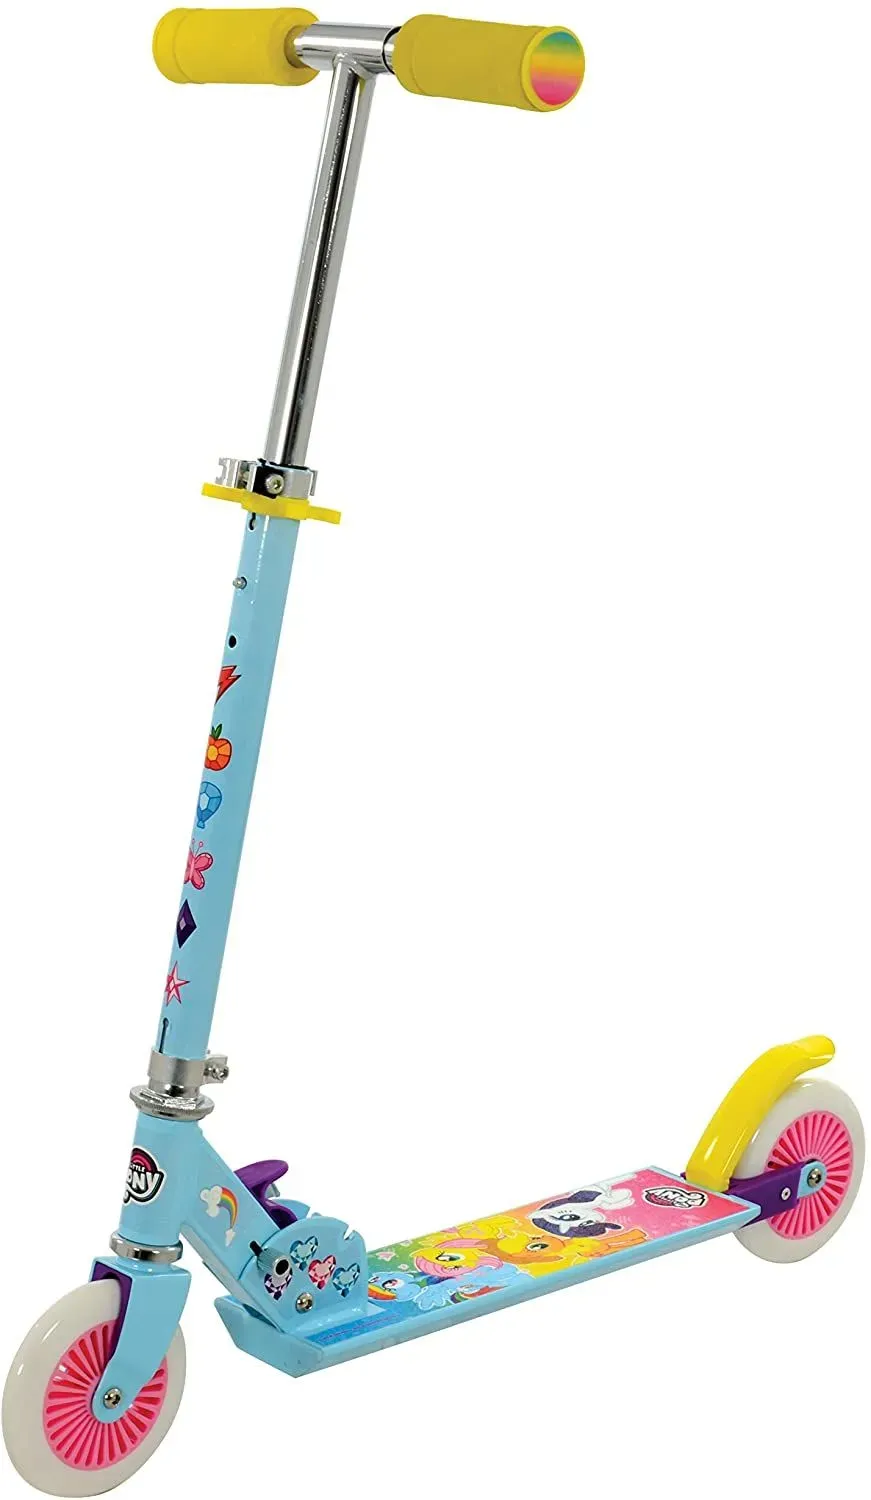 My Little Pony Scooter.